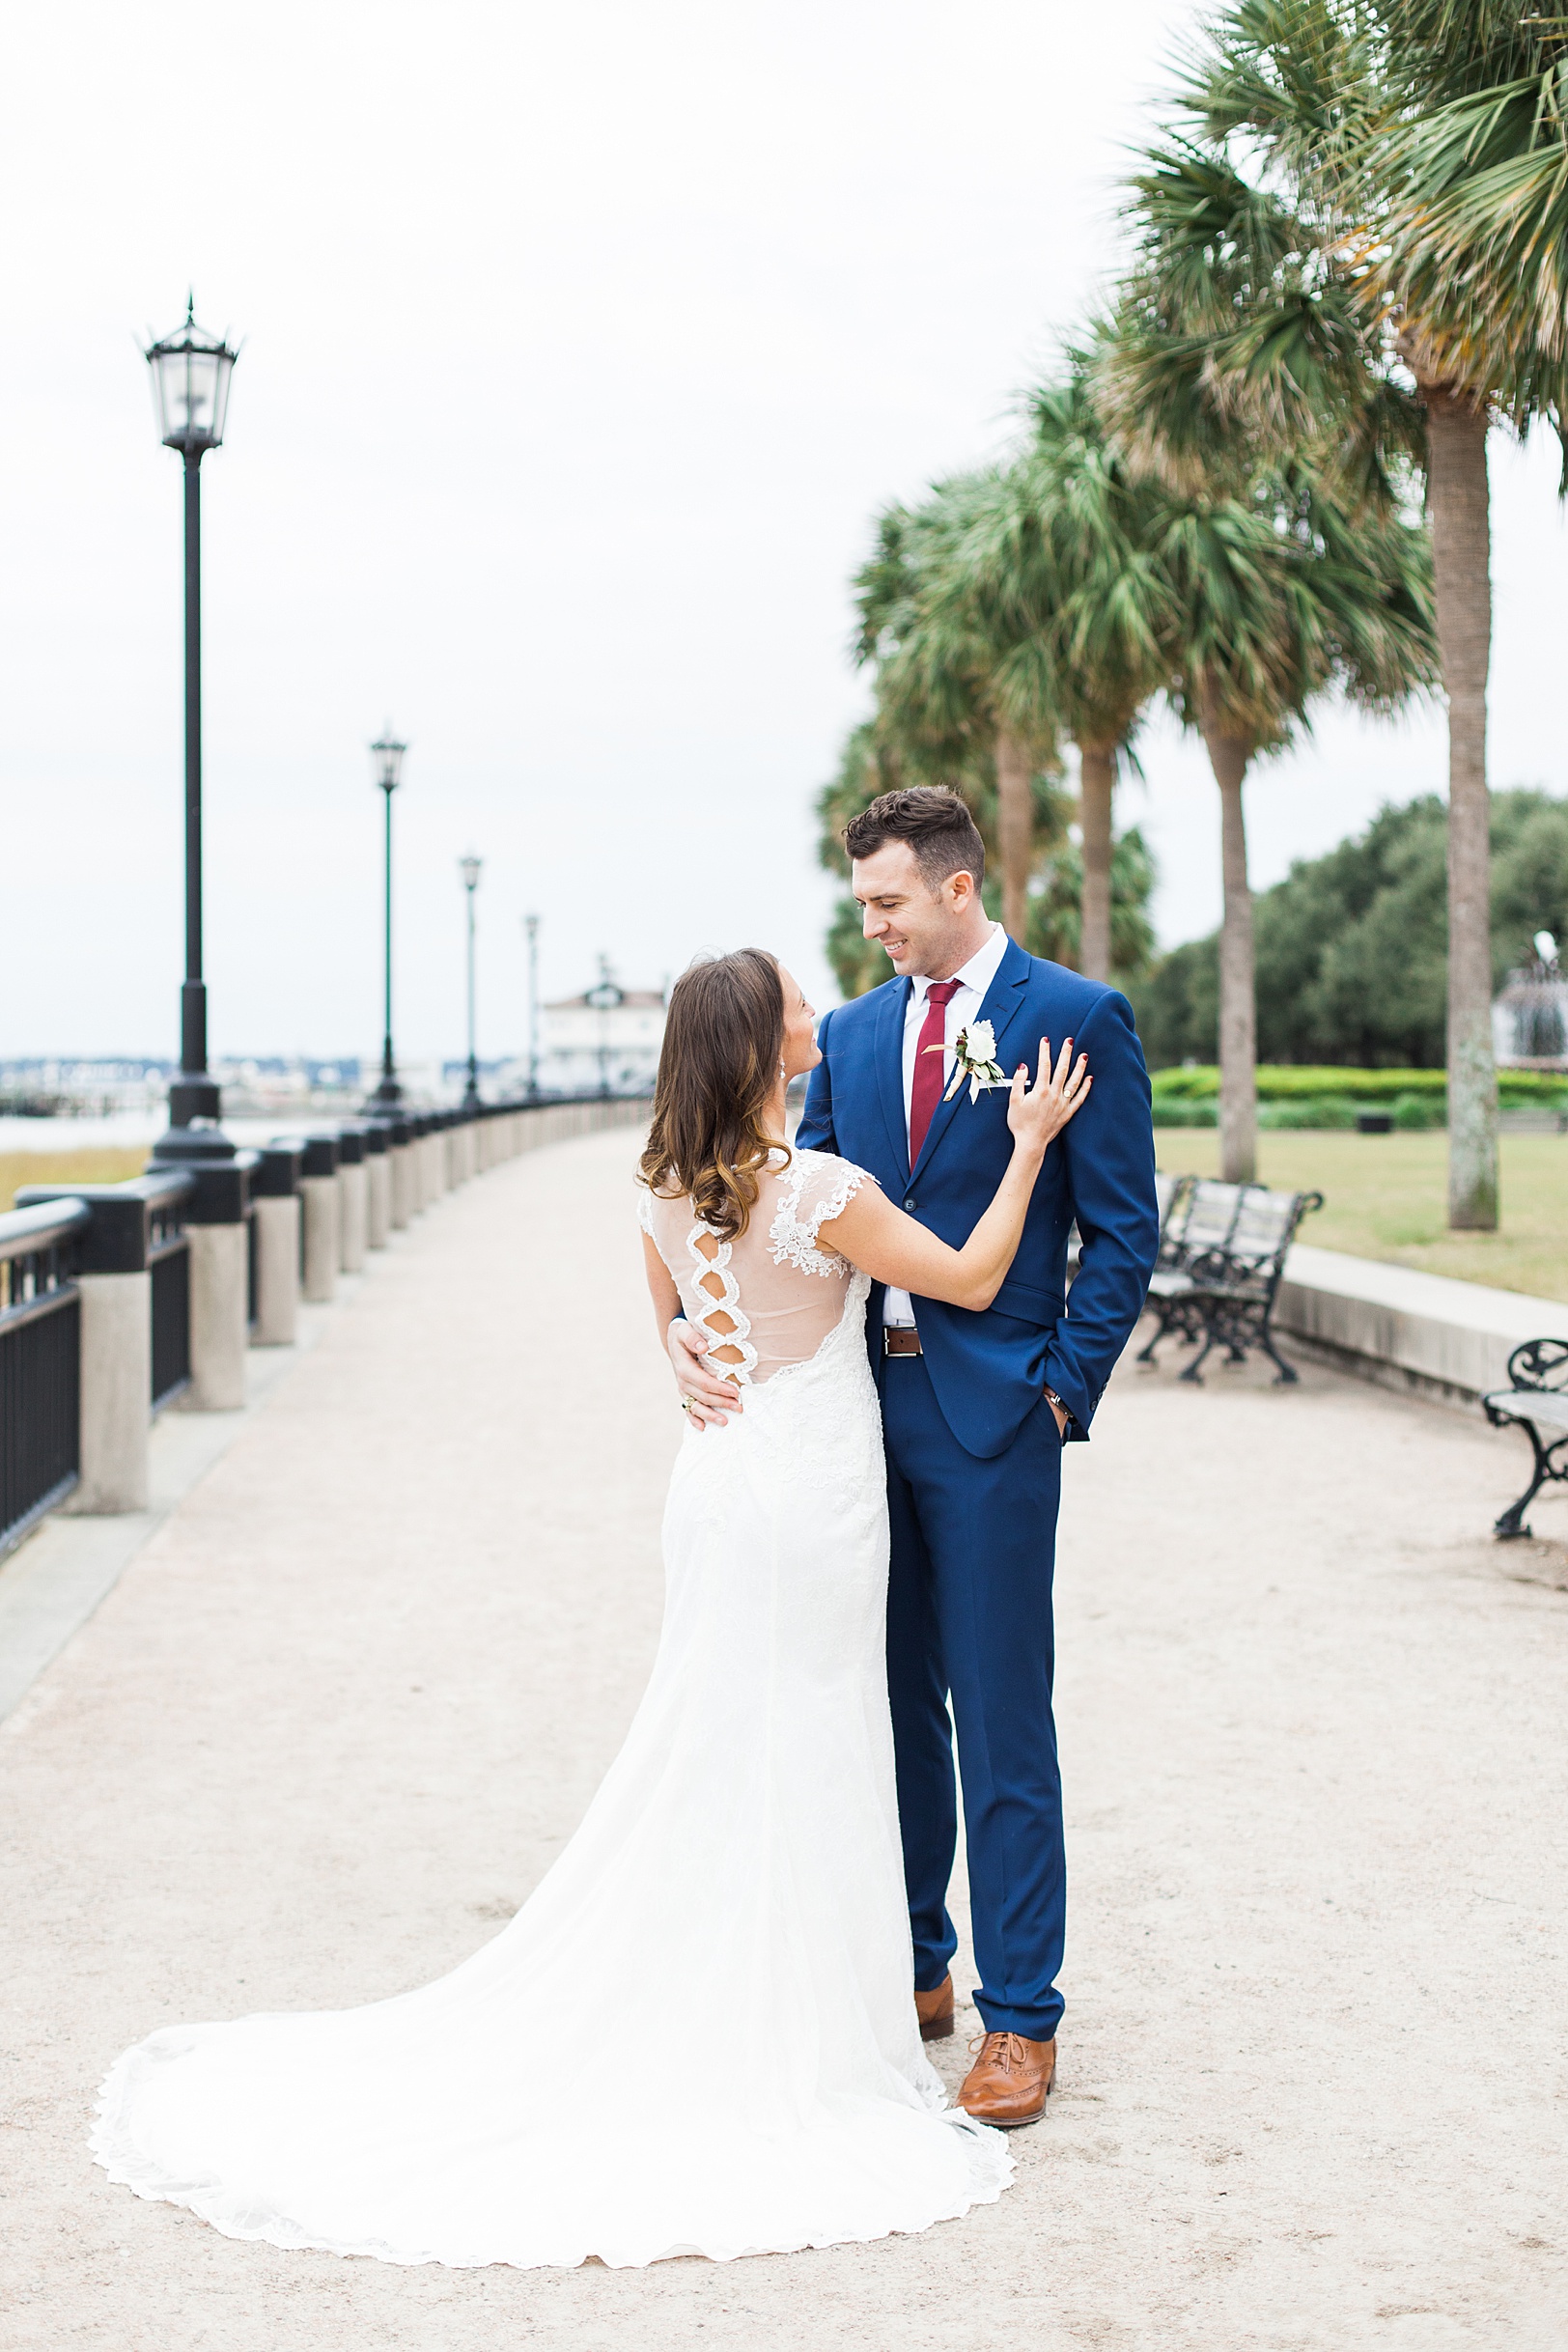 Bride and Groom at Charleston Waterfront Park | Kaitlin Scott Photography